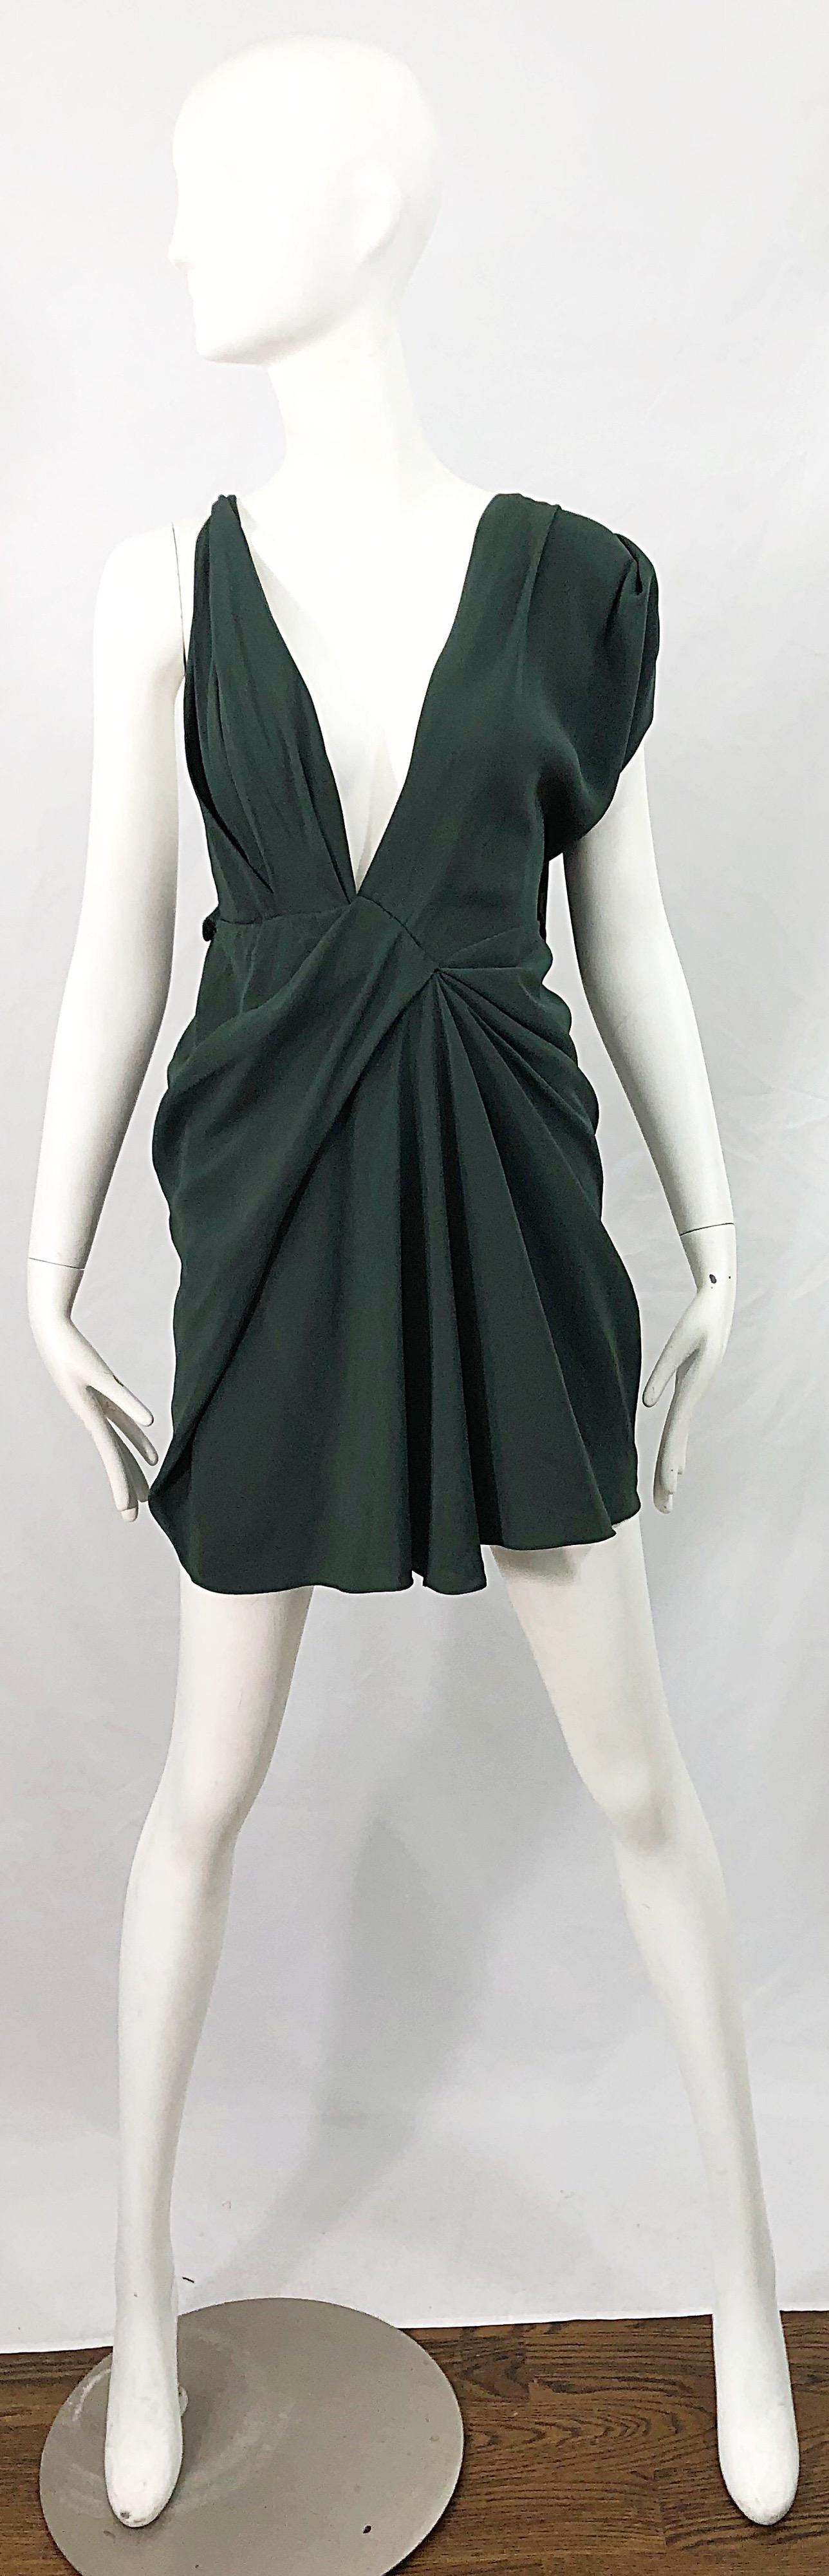 J Mendel Hunter Forest Green Sexy Plunging Early 2000s Asymmetrical Mini Dress For Sale 4